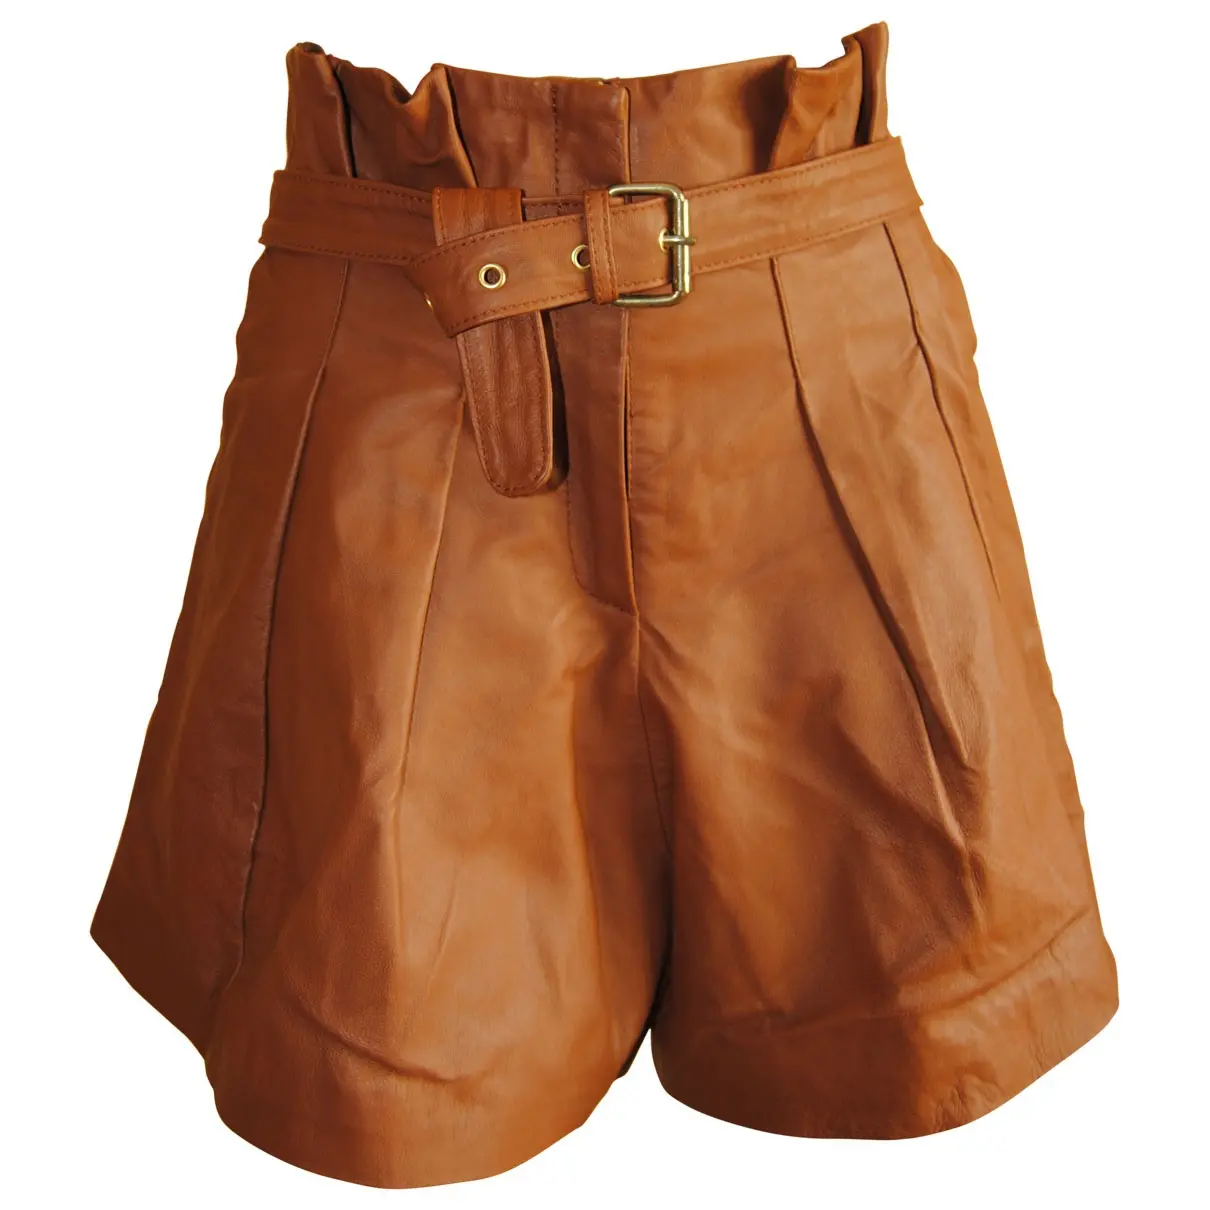 Brown Leather Shorts Tba